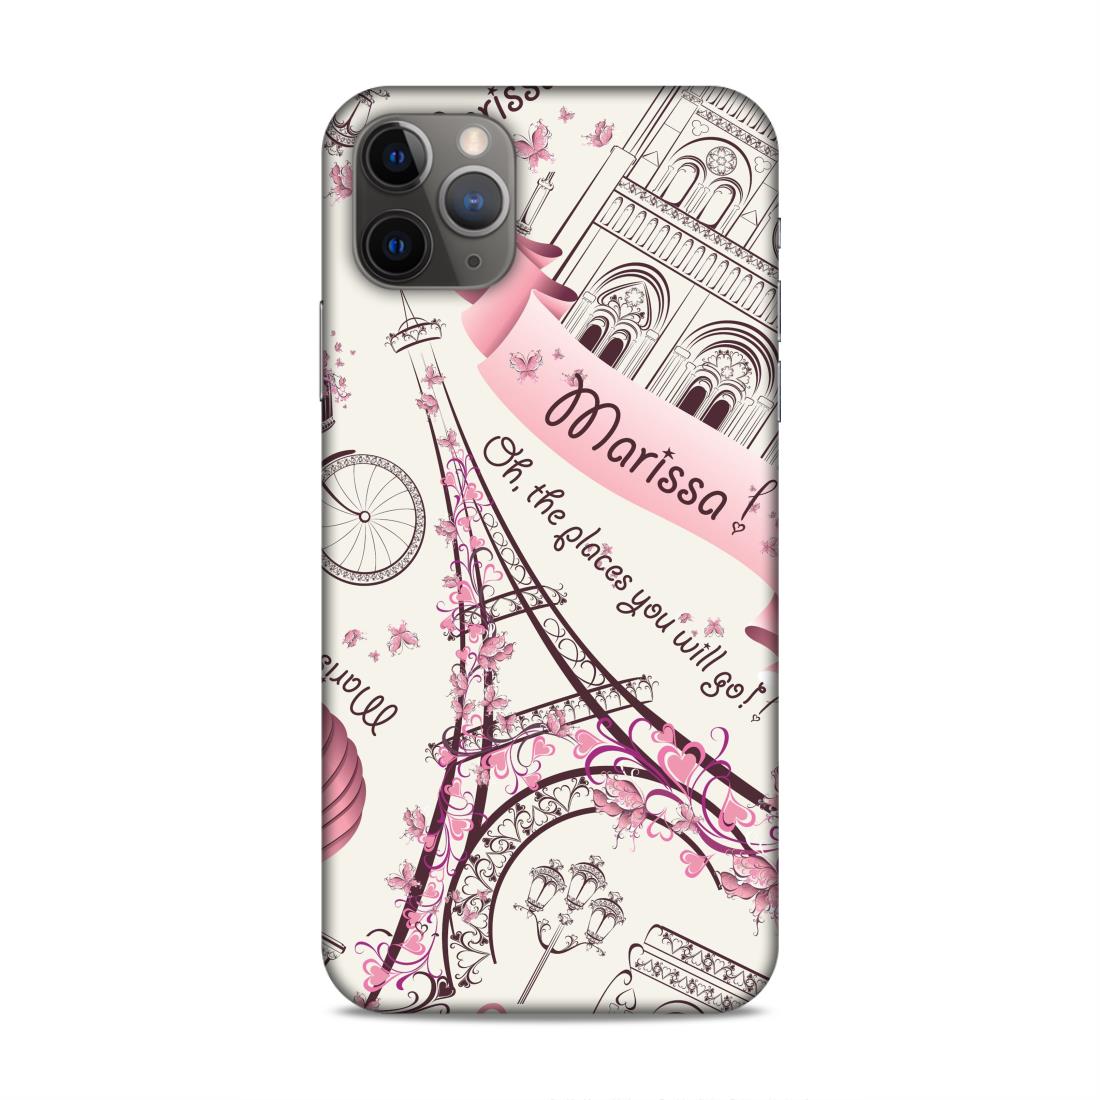 Love Efile Tower Hard Back Case For Apple iPhone 11 Pro Max